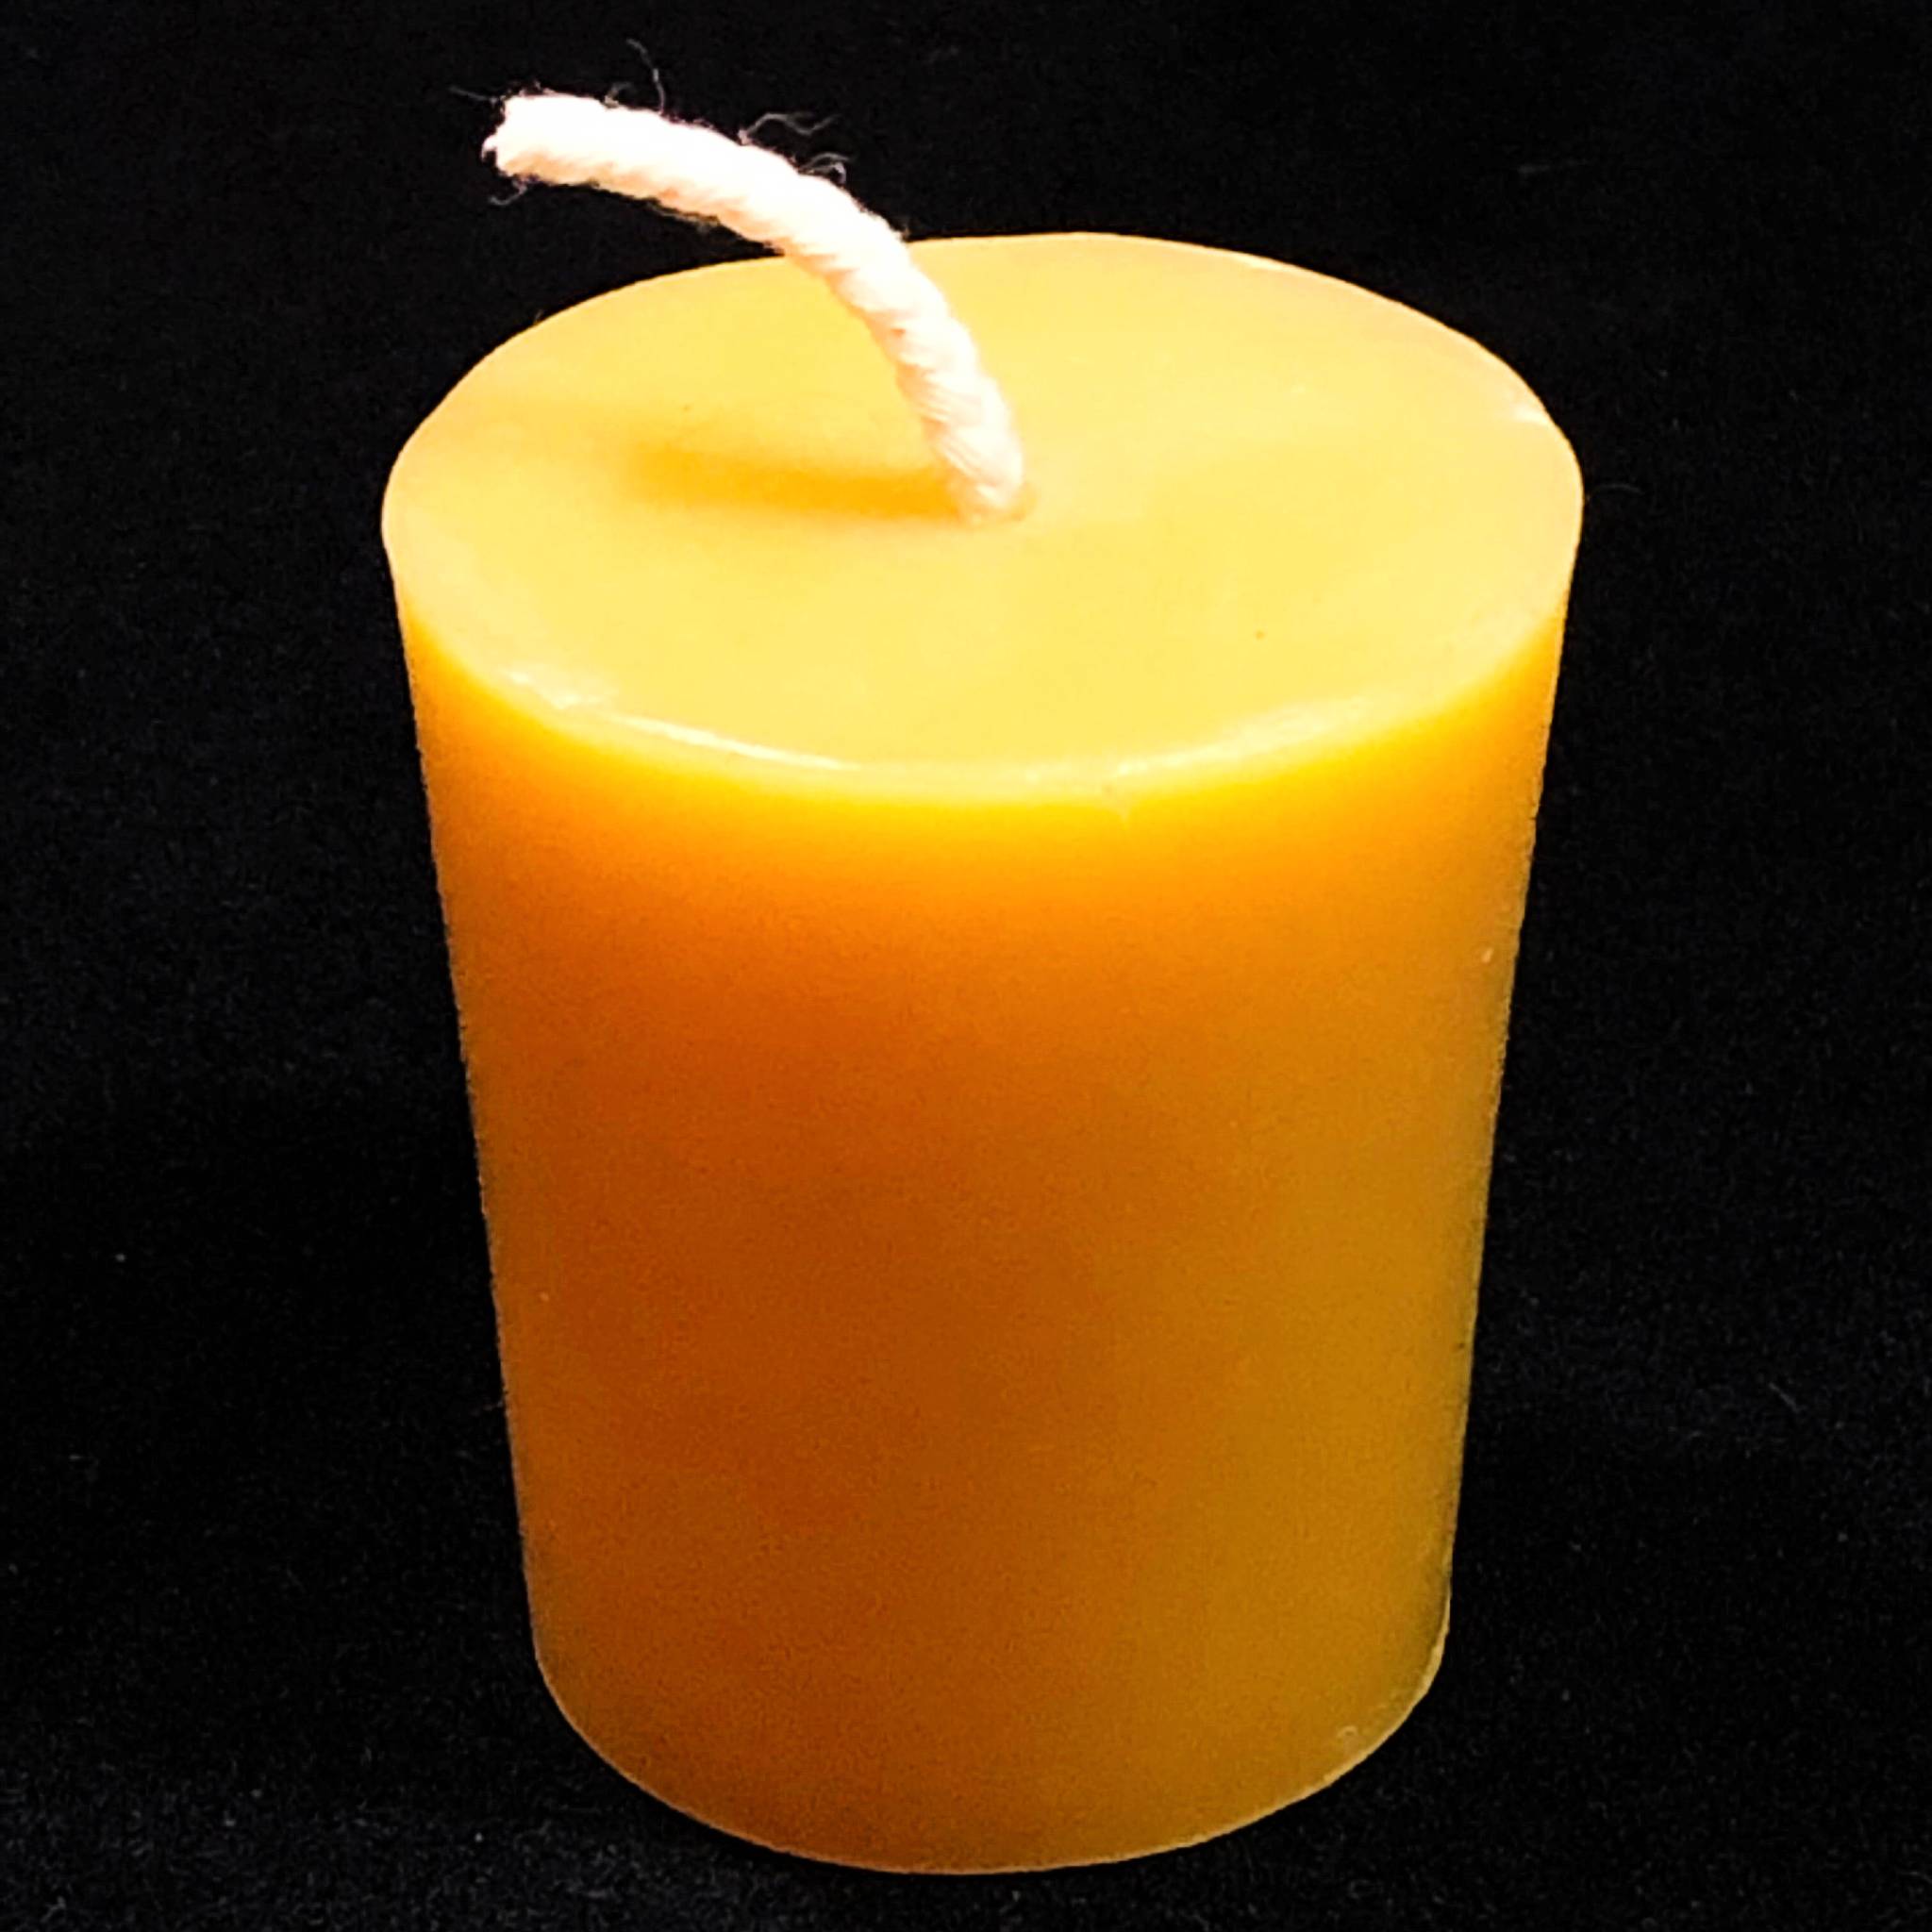 Beeswax votive candle from Mill Creek Apiary will burn for about 16 hours